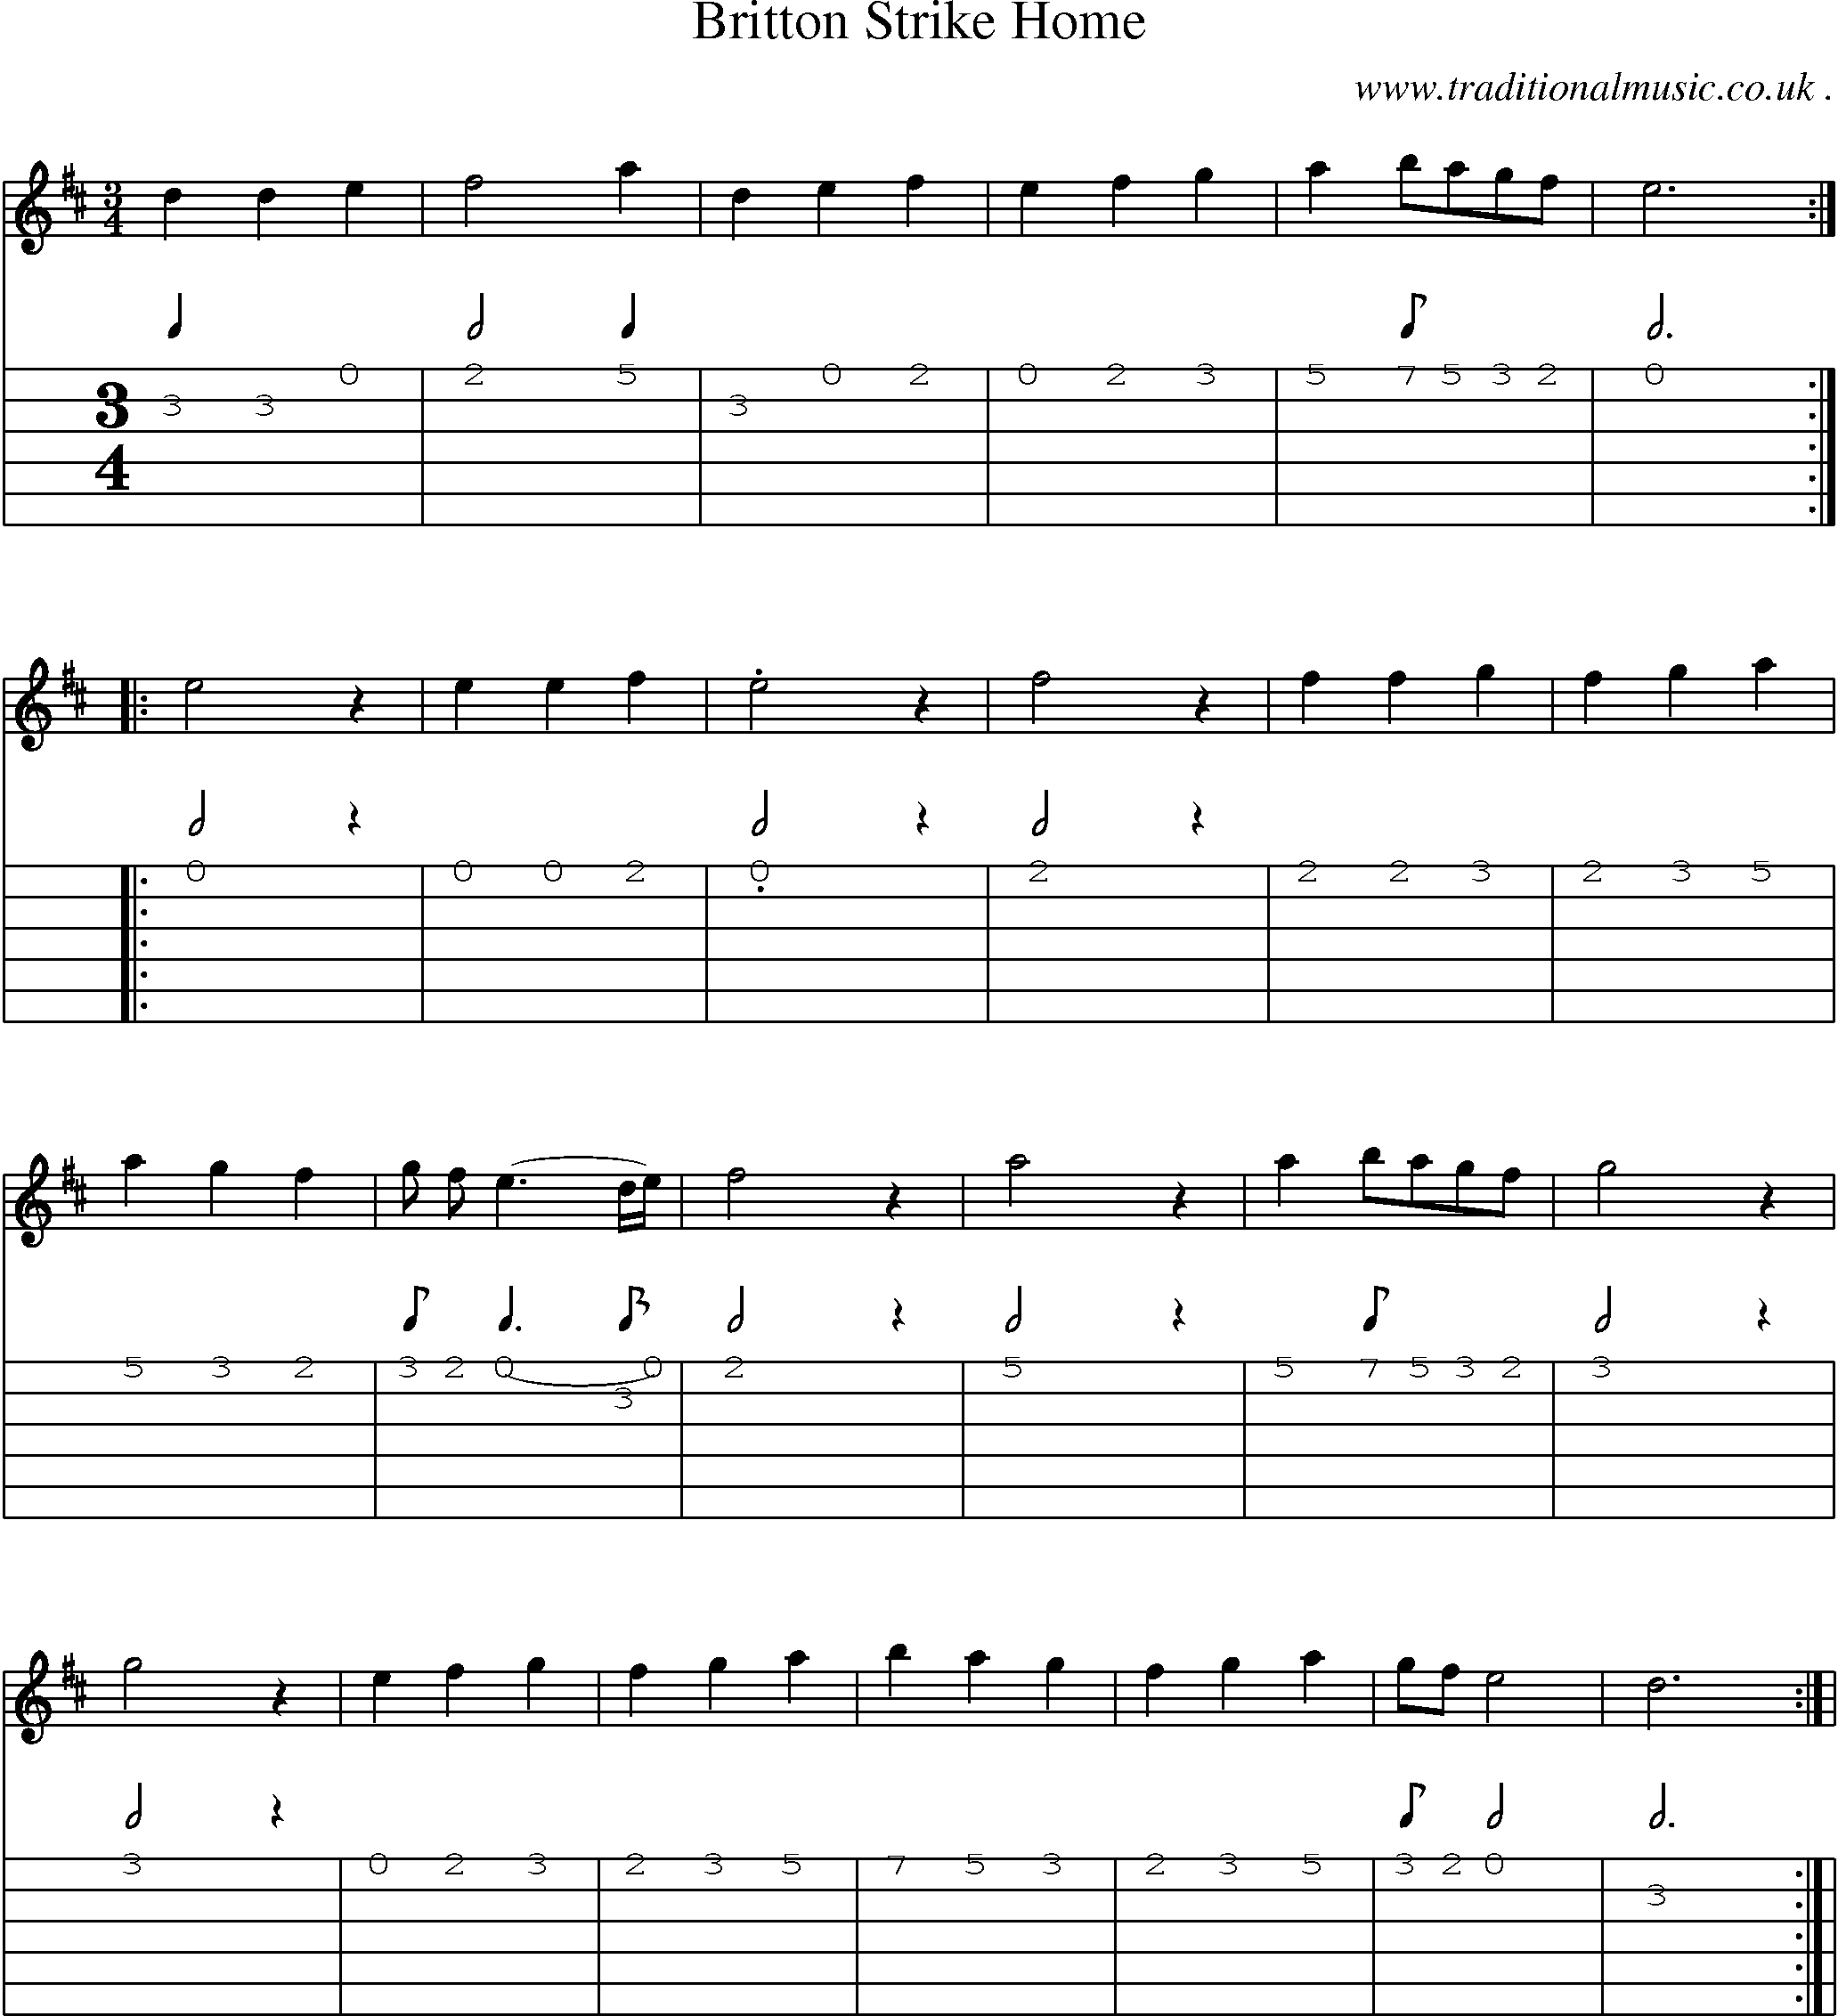 Sheet-Music and Guitar Tabs for Britton Strike Home